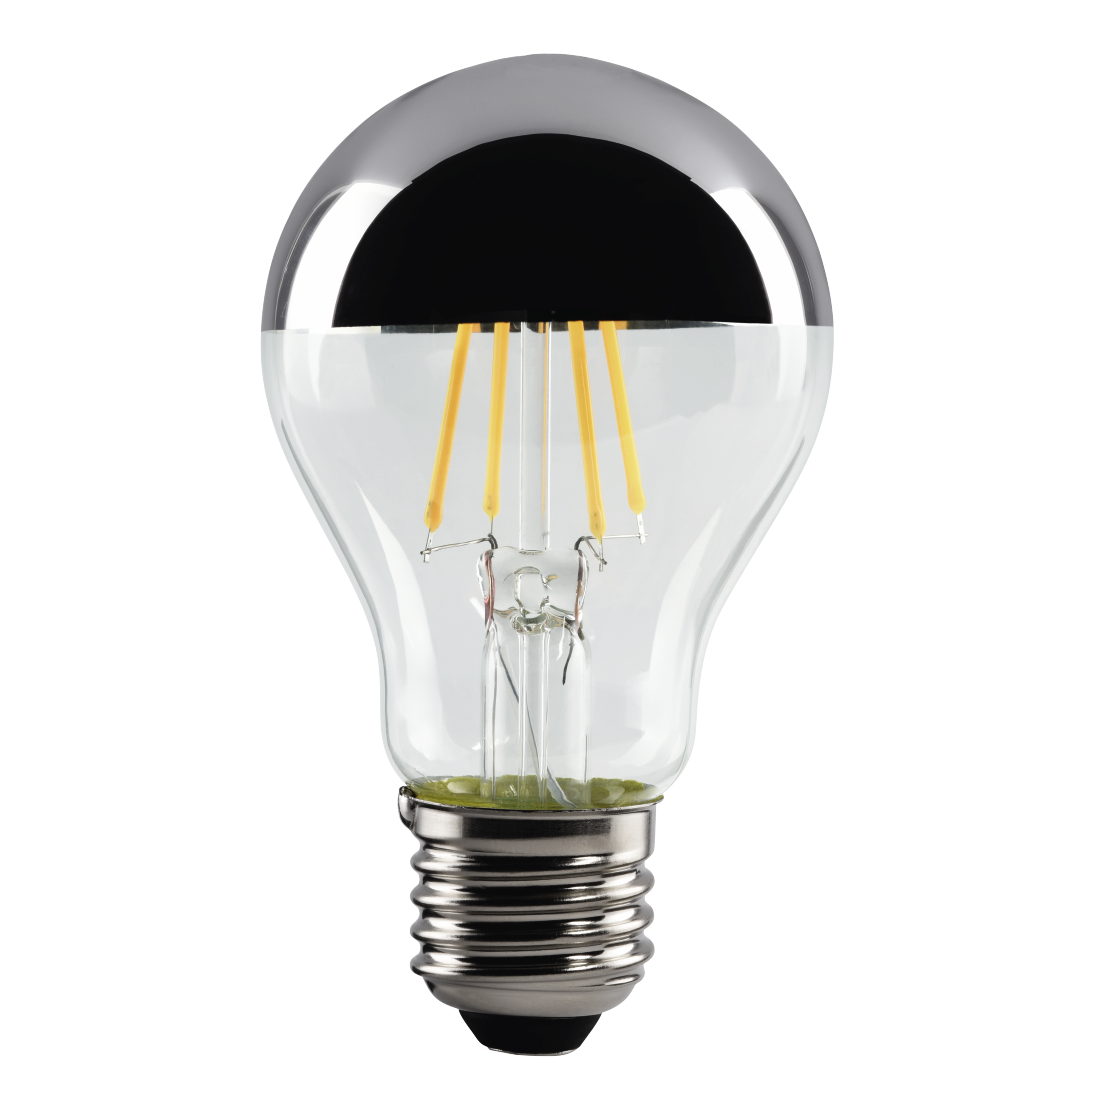 abx High-Res Image - Xavax, LED Filament, E27, 400 lm replaces 35W, incandescent bulb, warm white